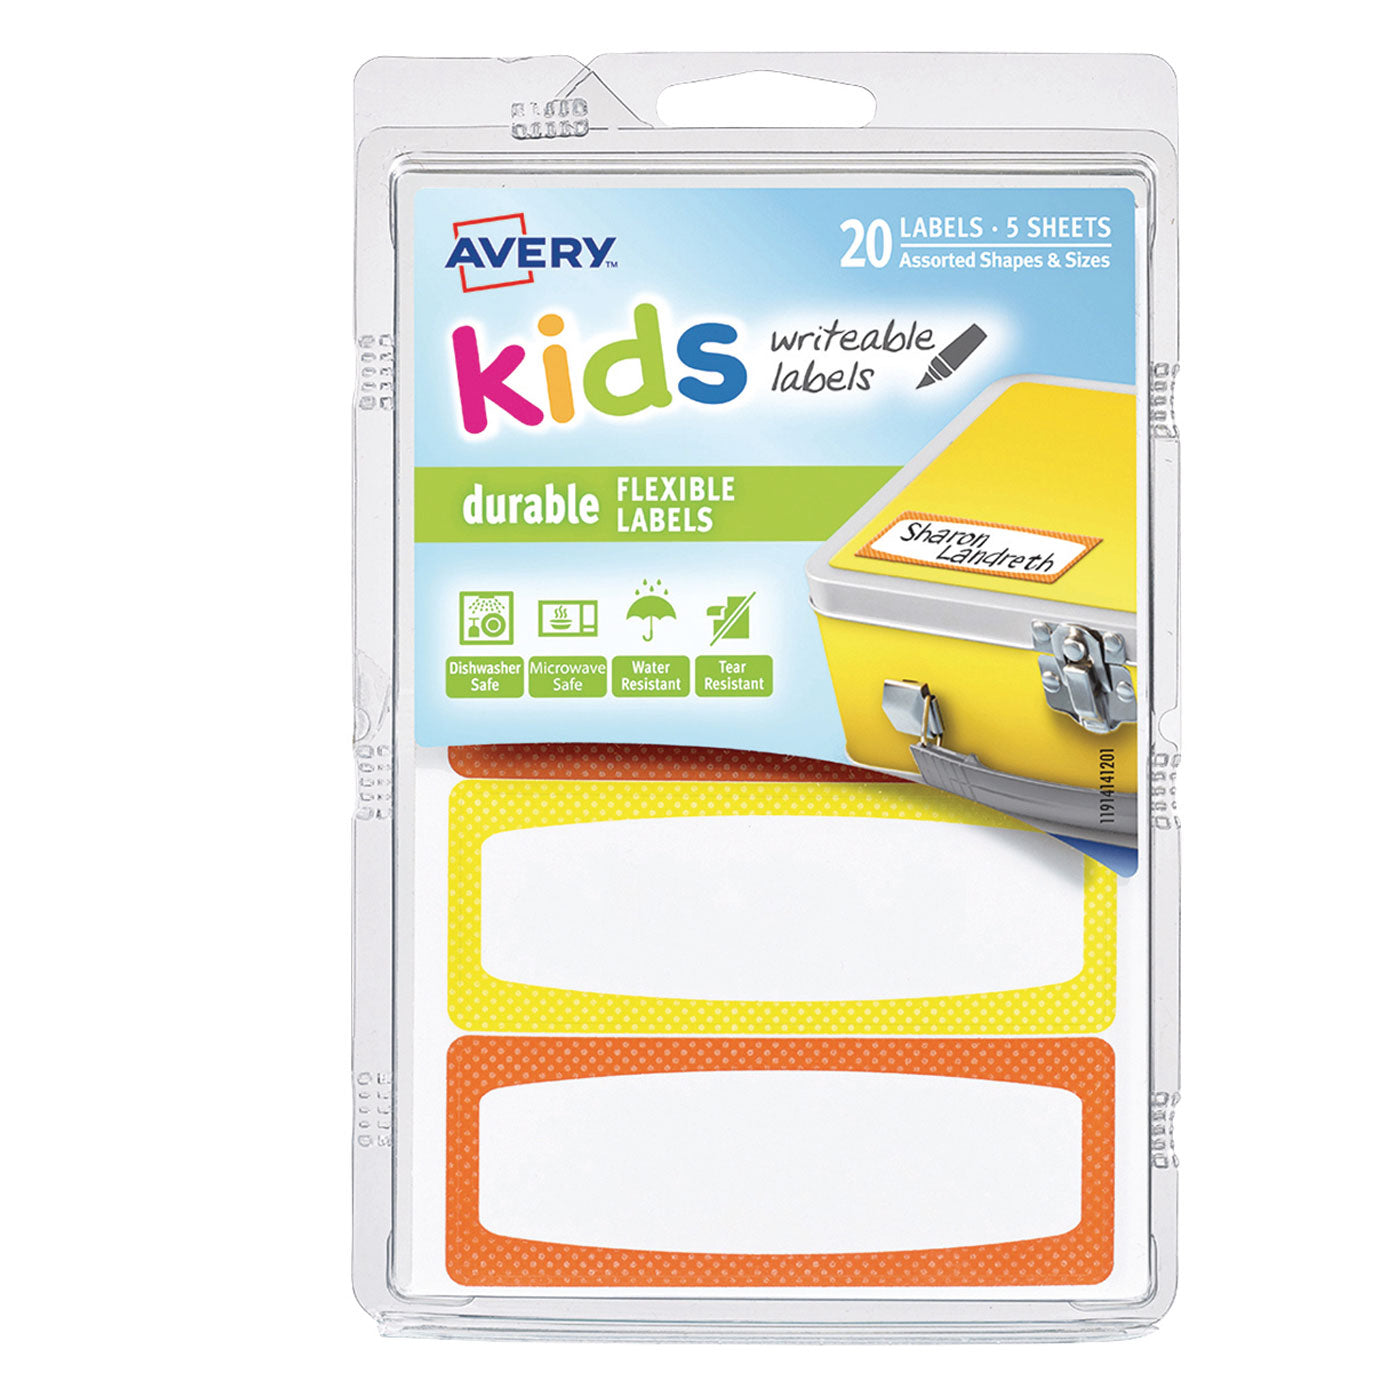  Avery Durable Kids Labels with Neon Border Orange Yellow - 20 Pack